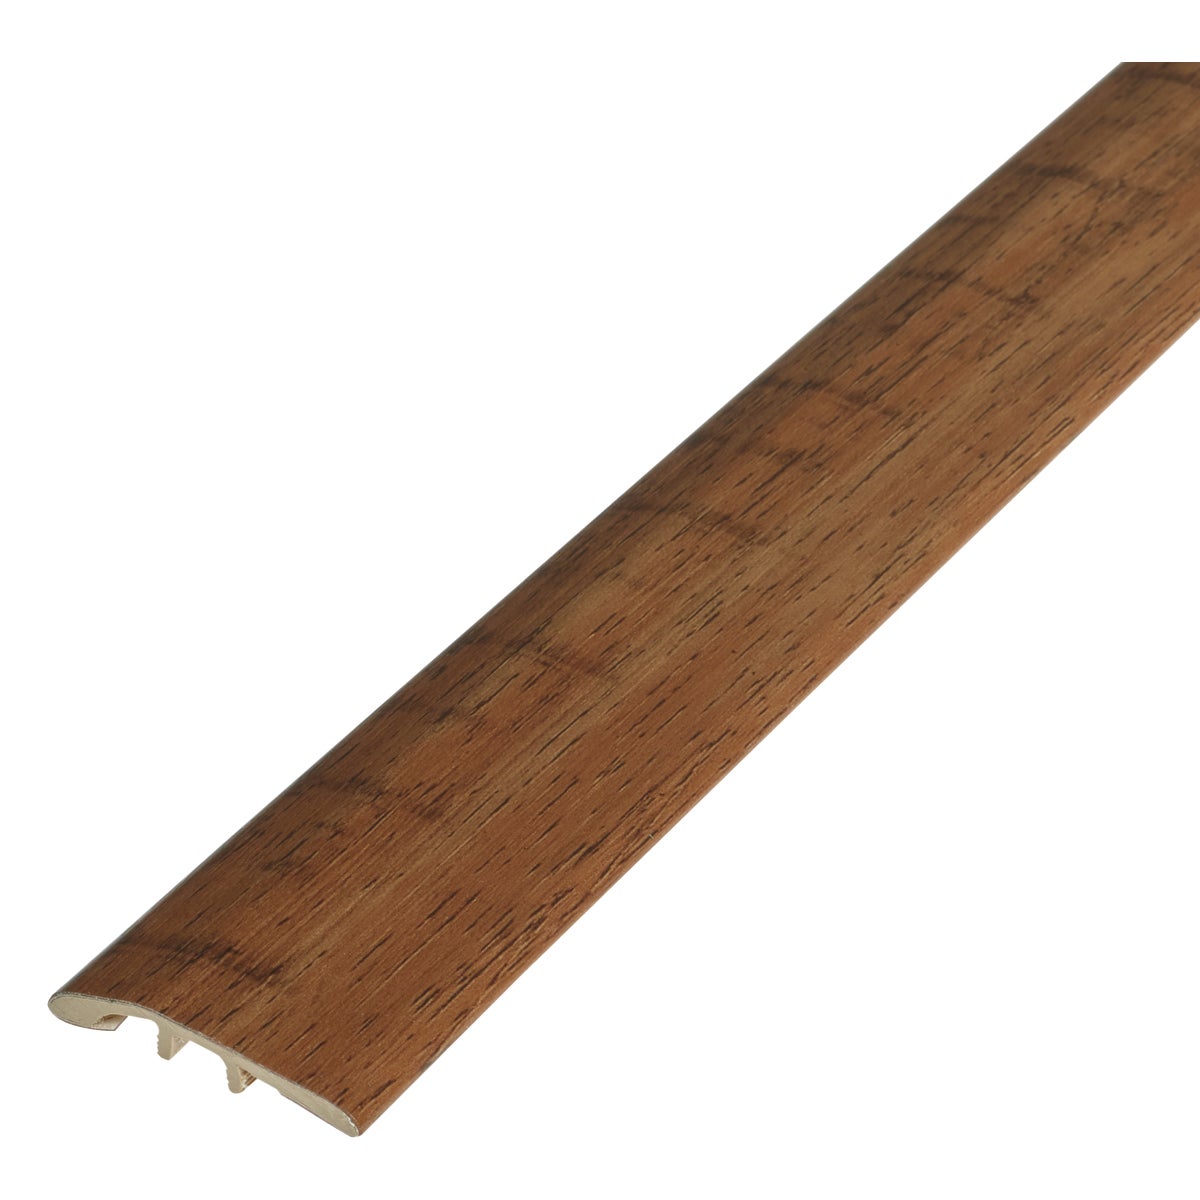 Shaw Impact Weathered Barnboard 1-3/4 In. W x 94 In. L Multipurpose Reducer Vinyl Floor Plank Trim